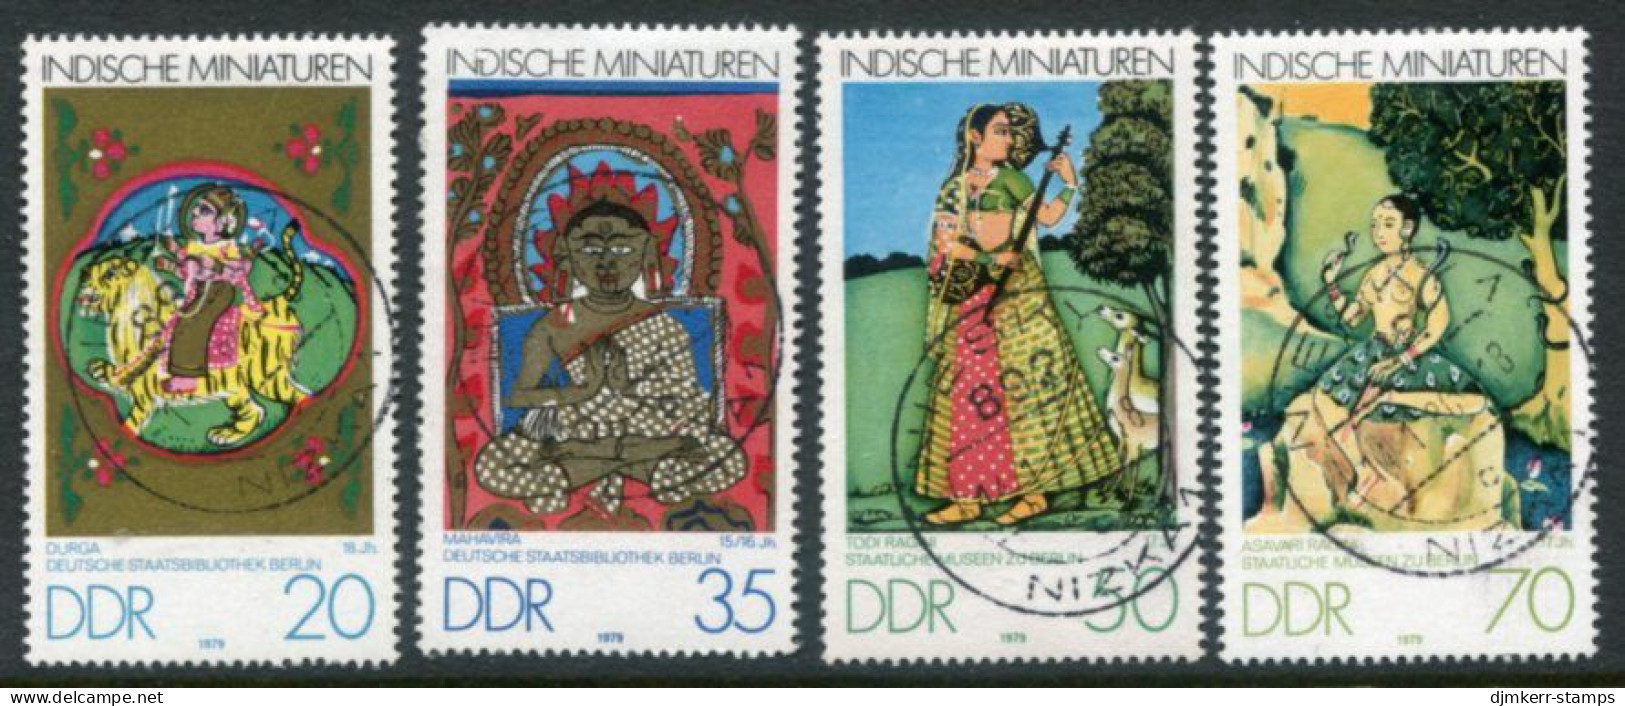 DDR / E. GERMANY 1979 Indian Miniatures Used.  Michel  2418-21 - Usati